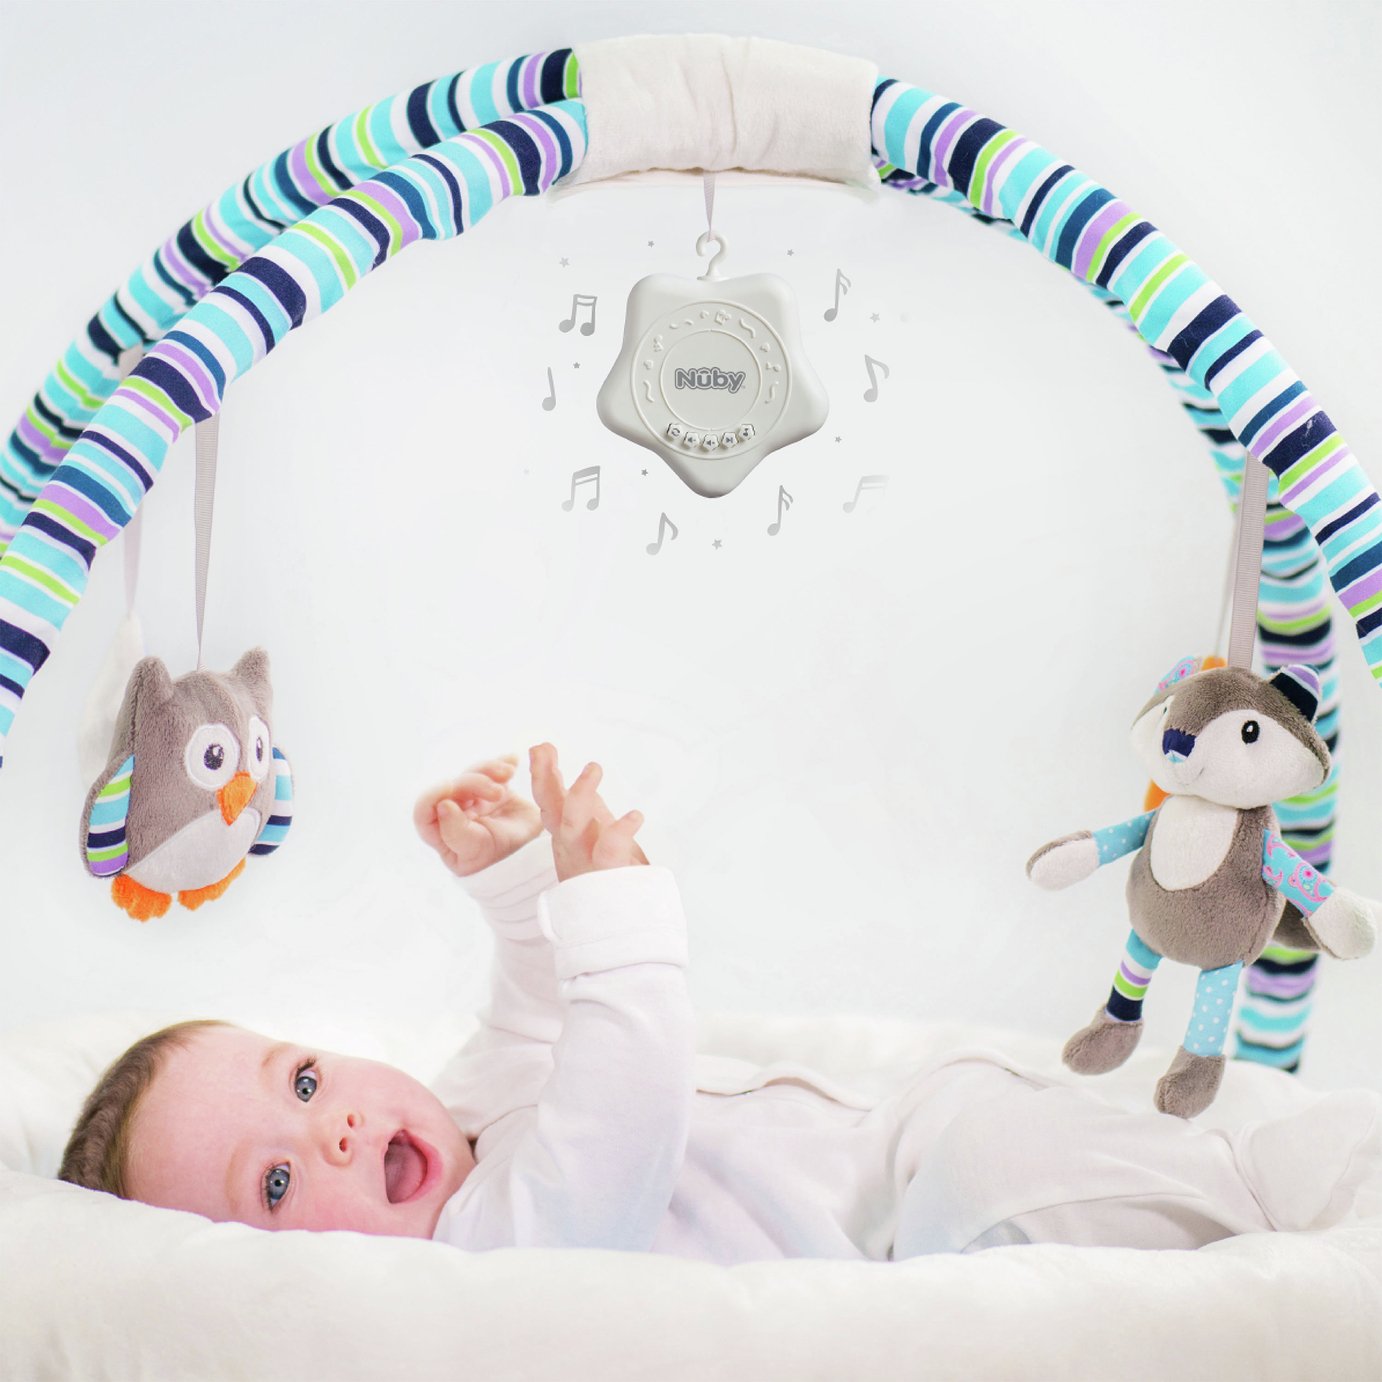 Nuby Little Fox Activity Play Gym Review